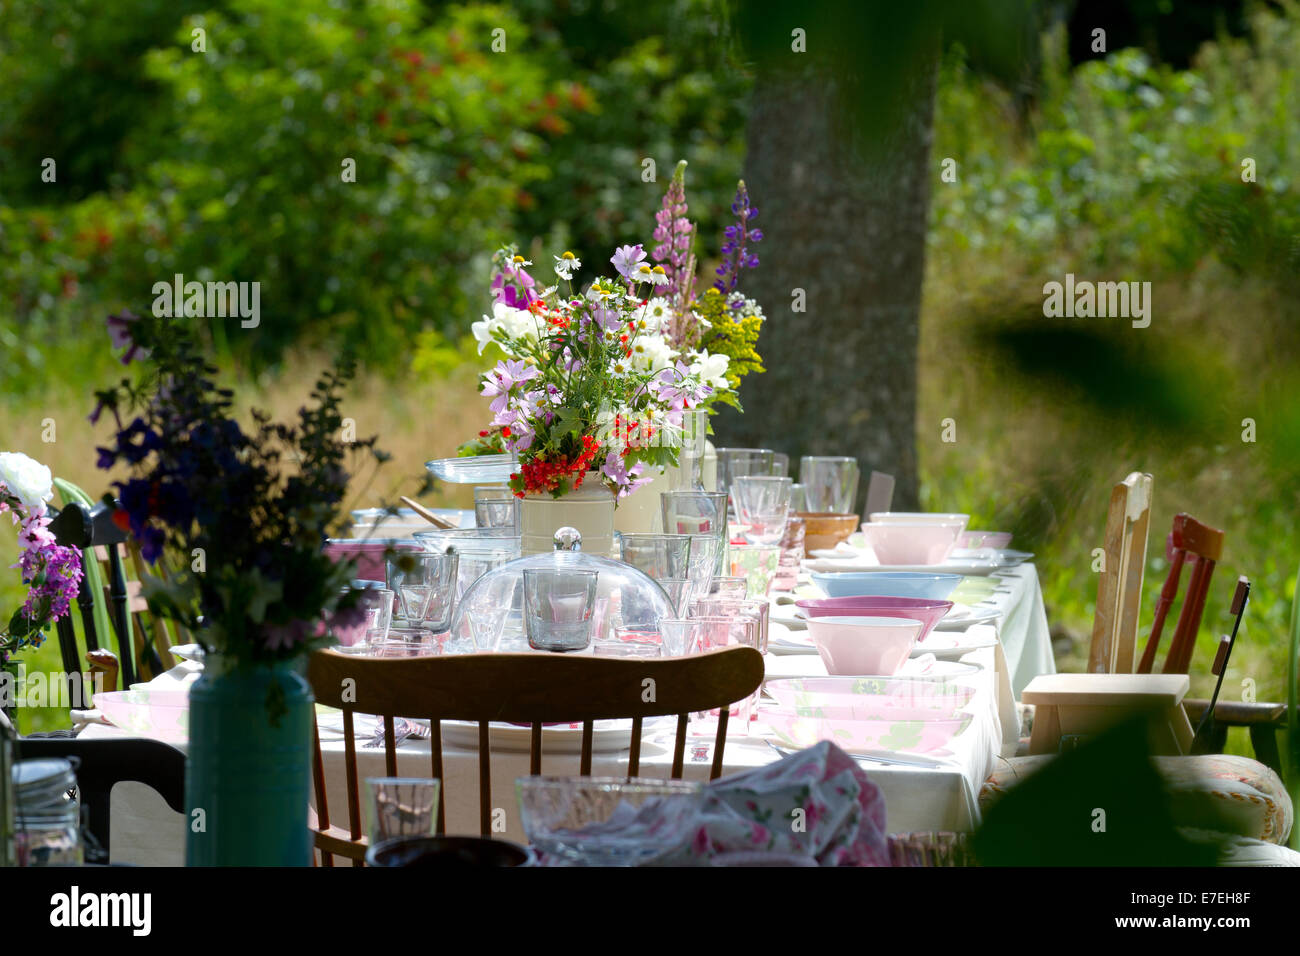 Outdoor table with nice colorful flowers Stock Photo